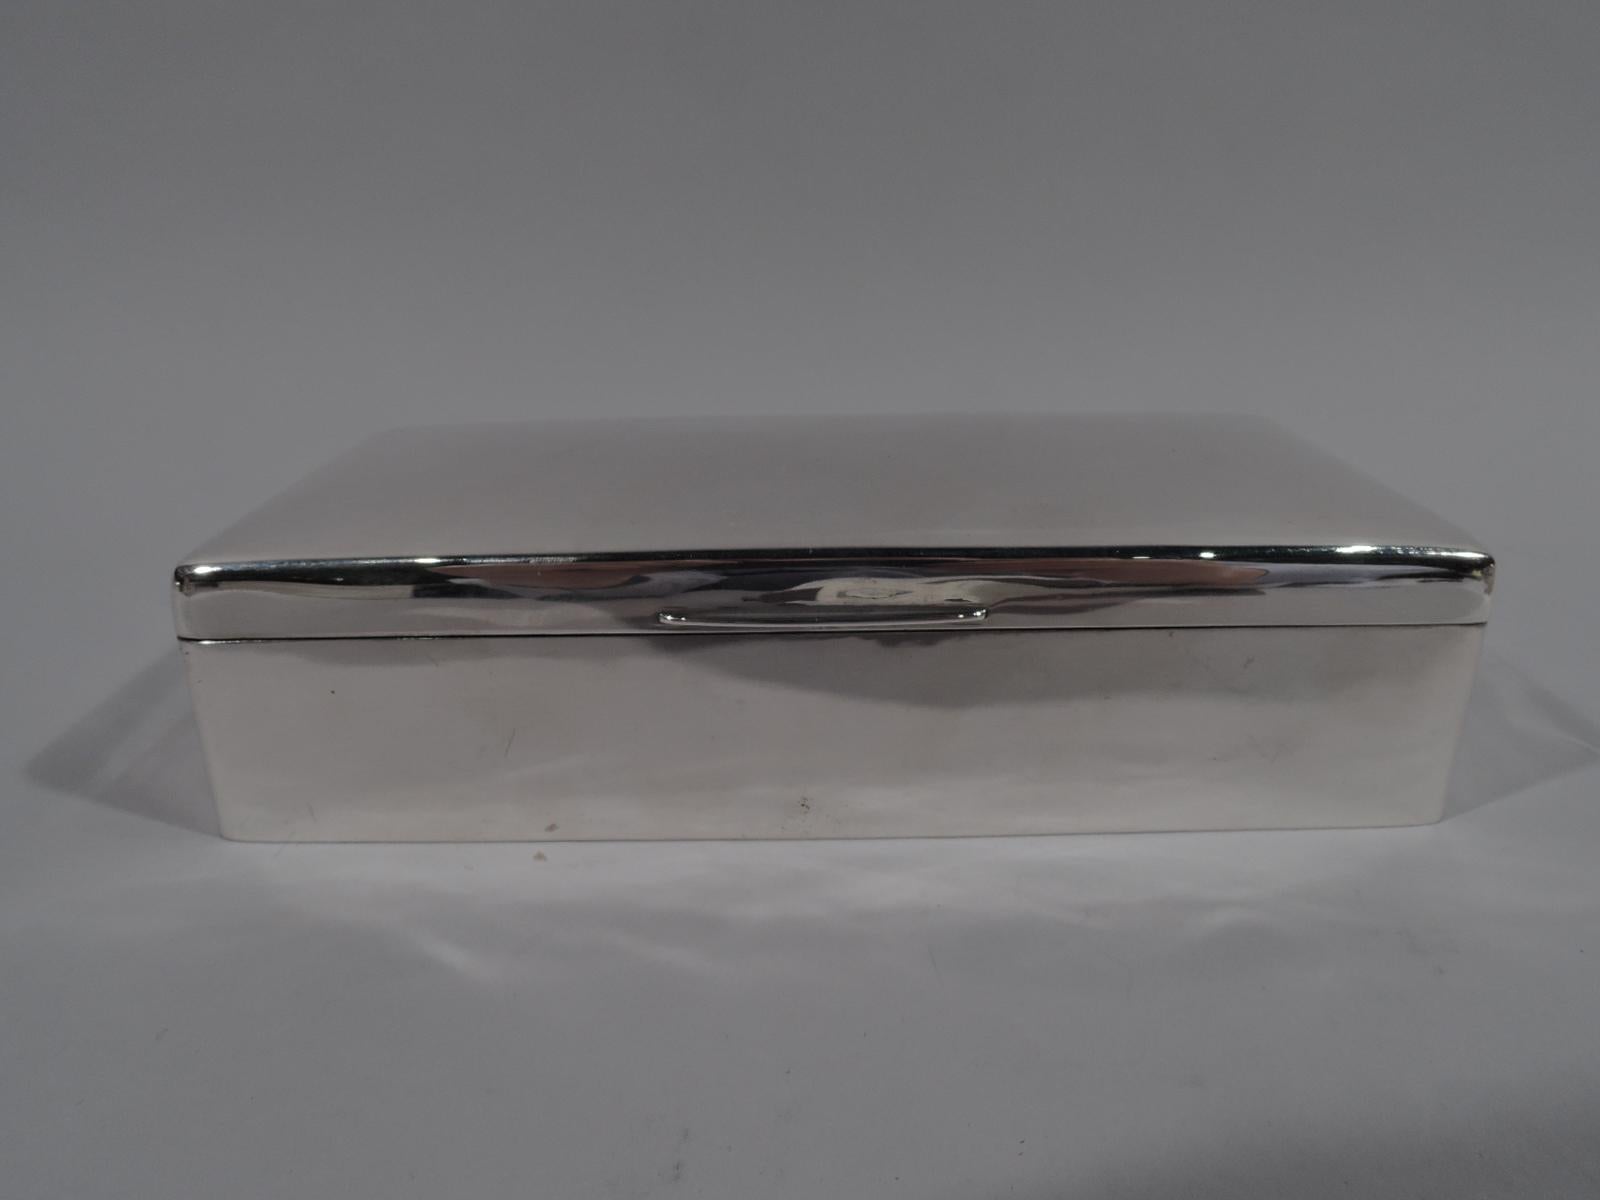 Edwardian Modern sterling silver box. Made by Arthur & John Zimmerman in Birmingham in 1904. Rectangular with straight sides and curved corners. Cover hinged and gently curved with curved tab. Box and cover interior cedar lined and partitioned.